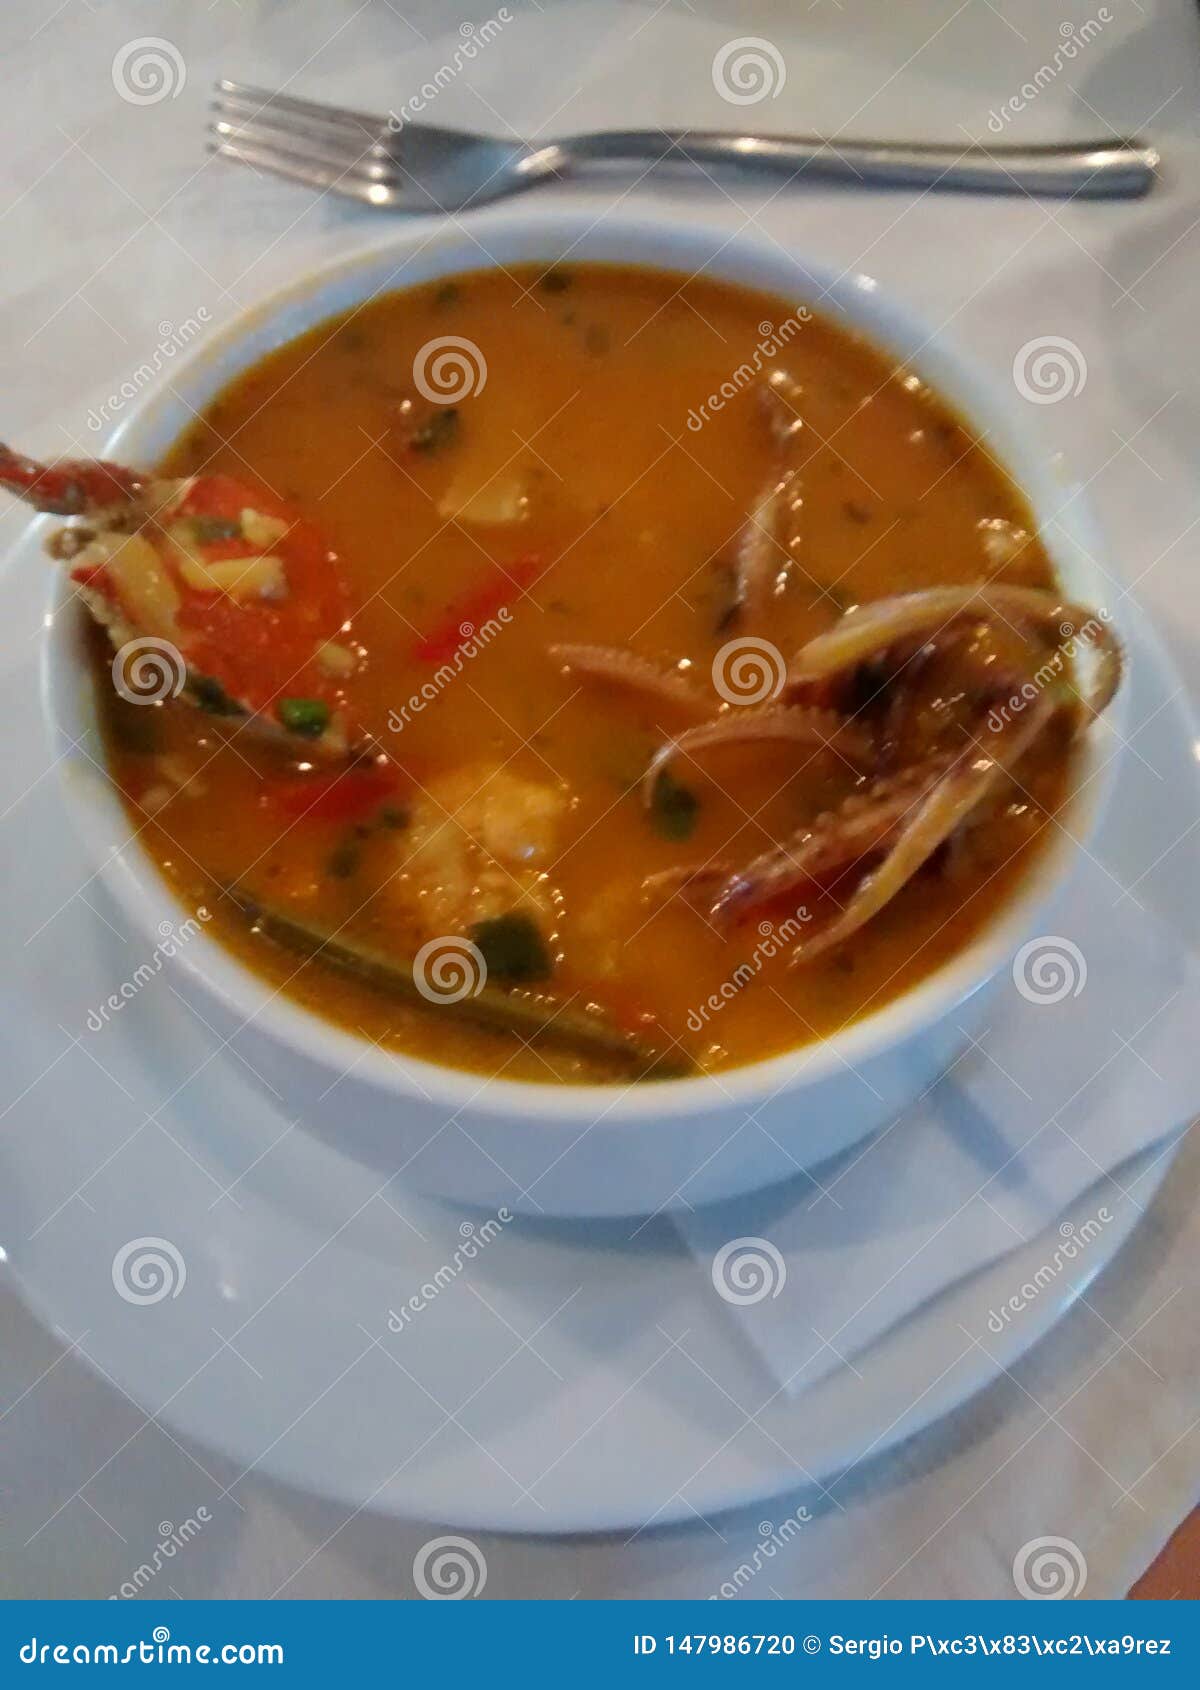 seafood soup in taza blanca in restaurant